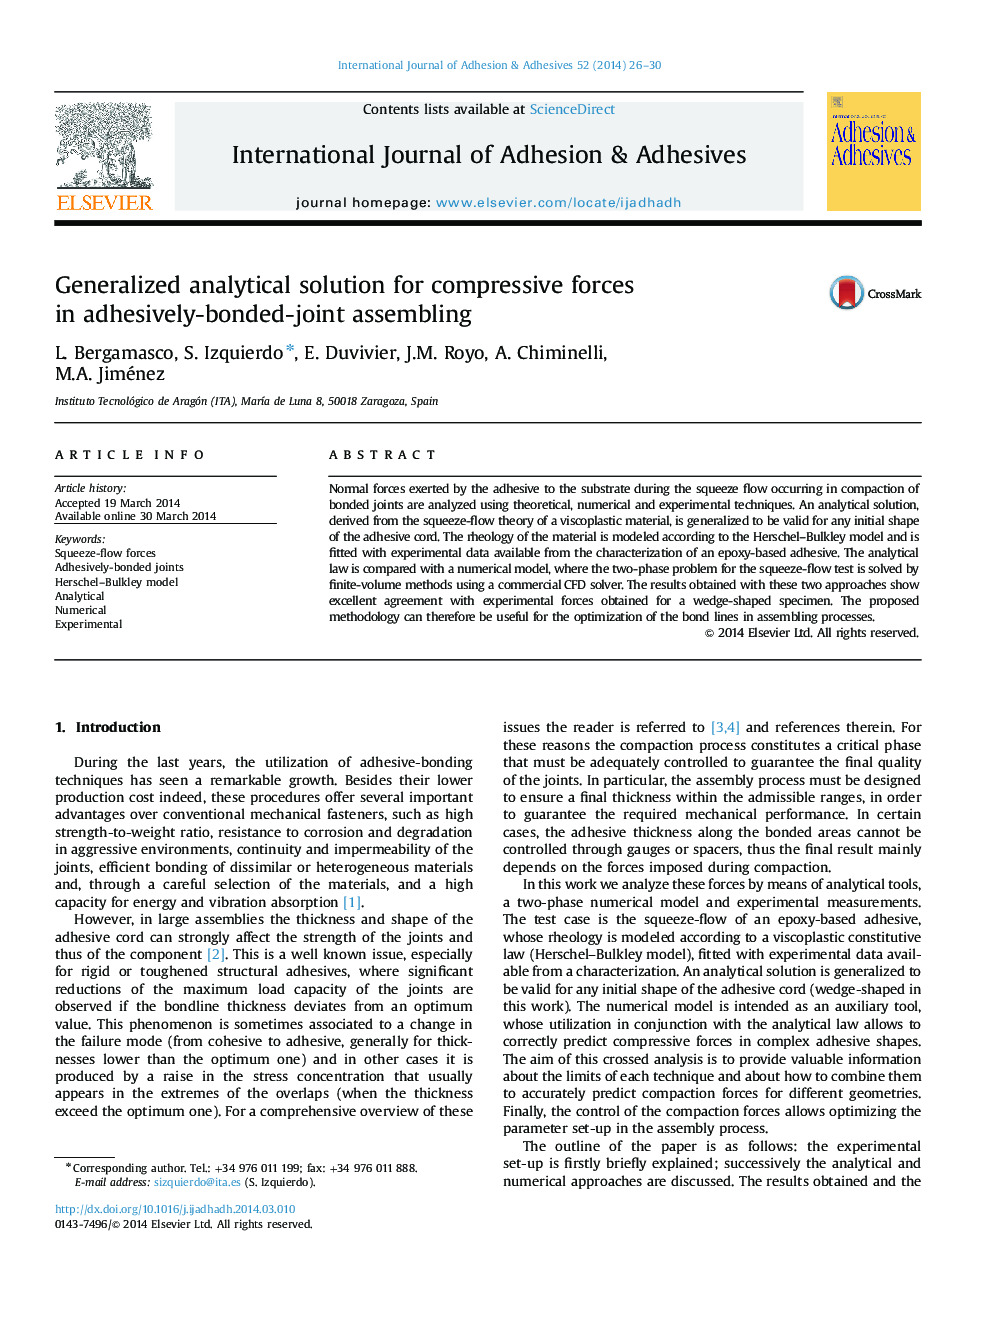 Generalized analytical solution for compressive forces in adhesively-bonded-joint assembling